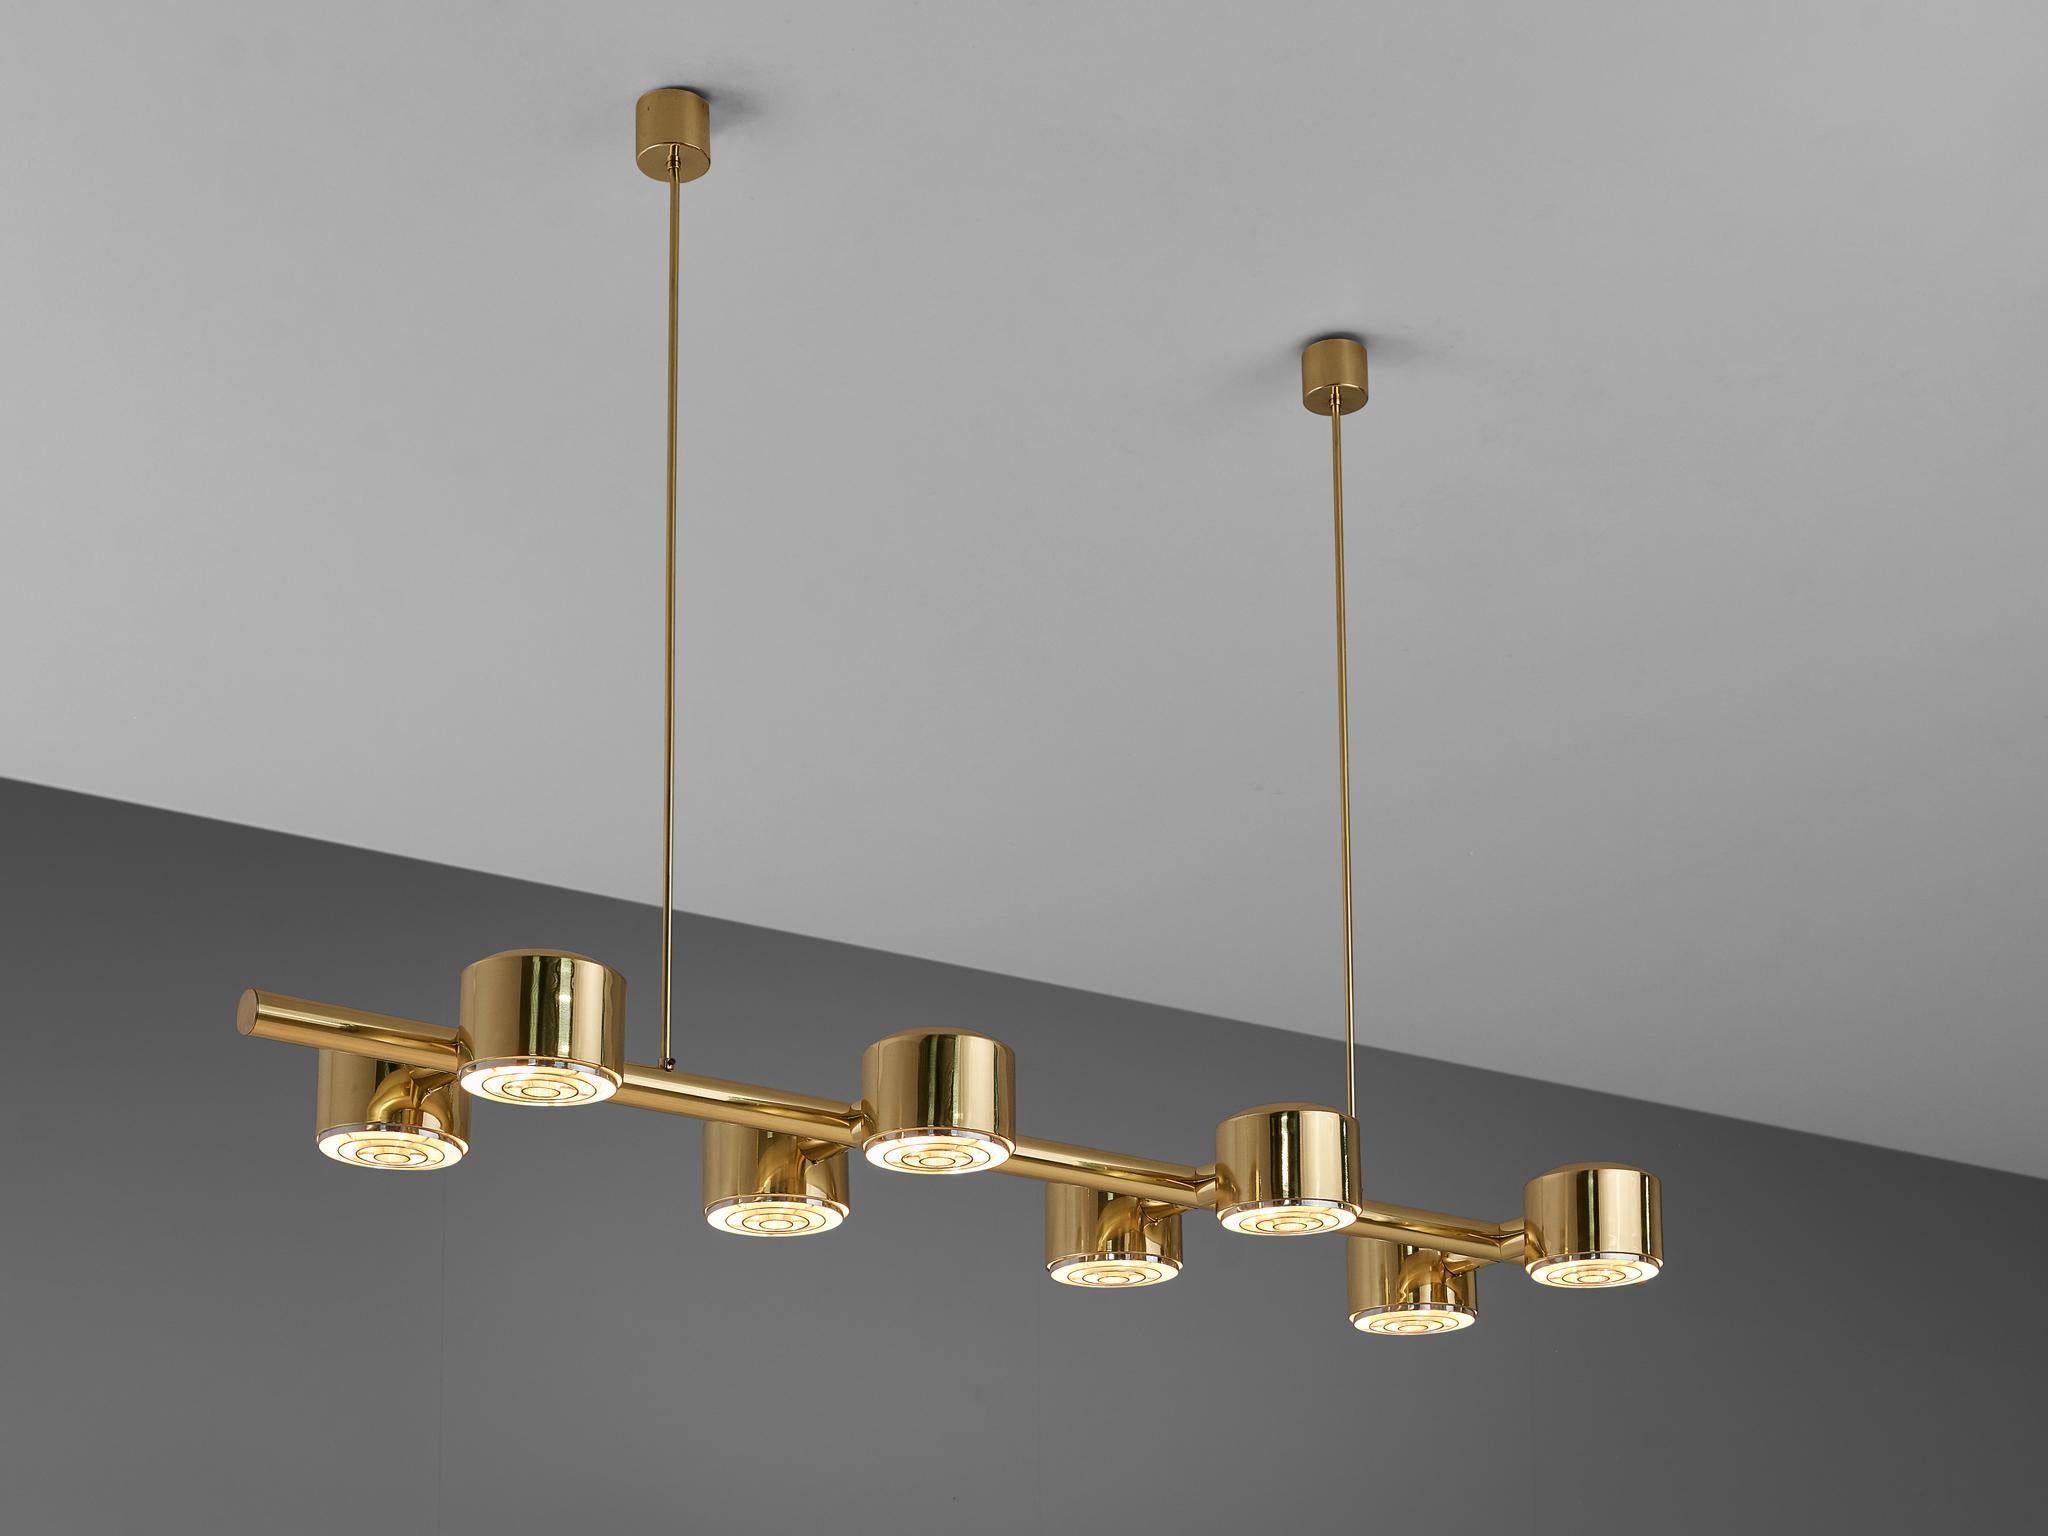 Hans-Agne Jakobsson for Hans-Agne Jakobsson AB in Markaryd, model 'T 746/8' chandelier, brass, glass, Sweden, 1960s

Hans-Agne Jakobsson designed this chandelier with eight cylindrical lightbulbs paired on a line. The brass reflects the light